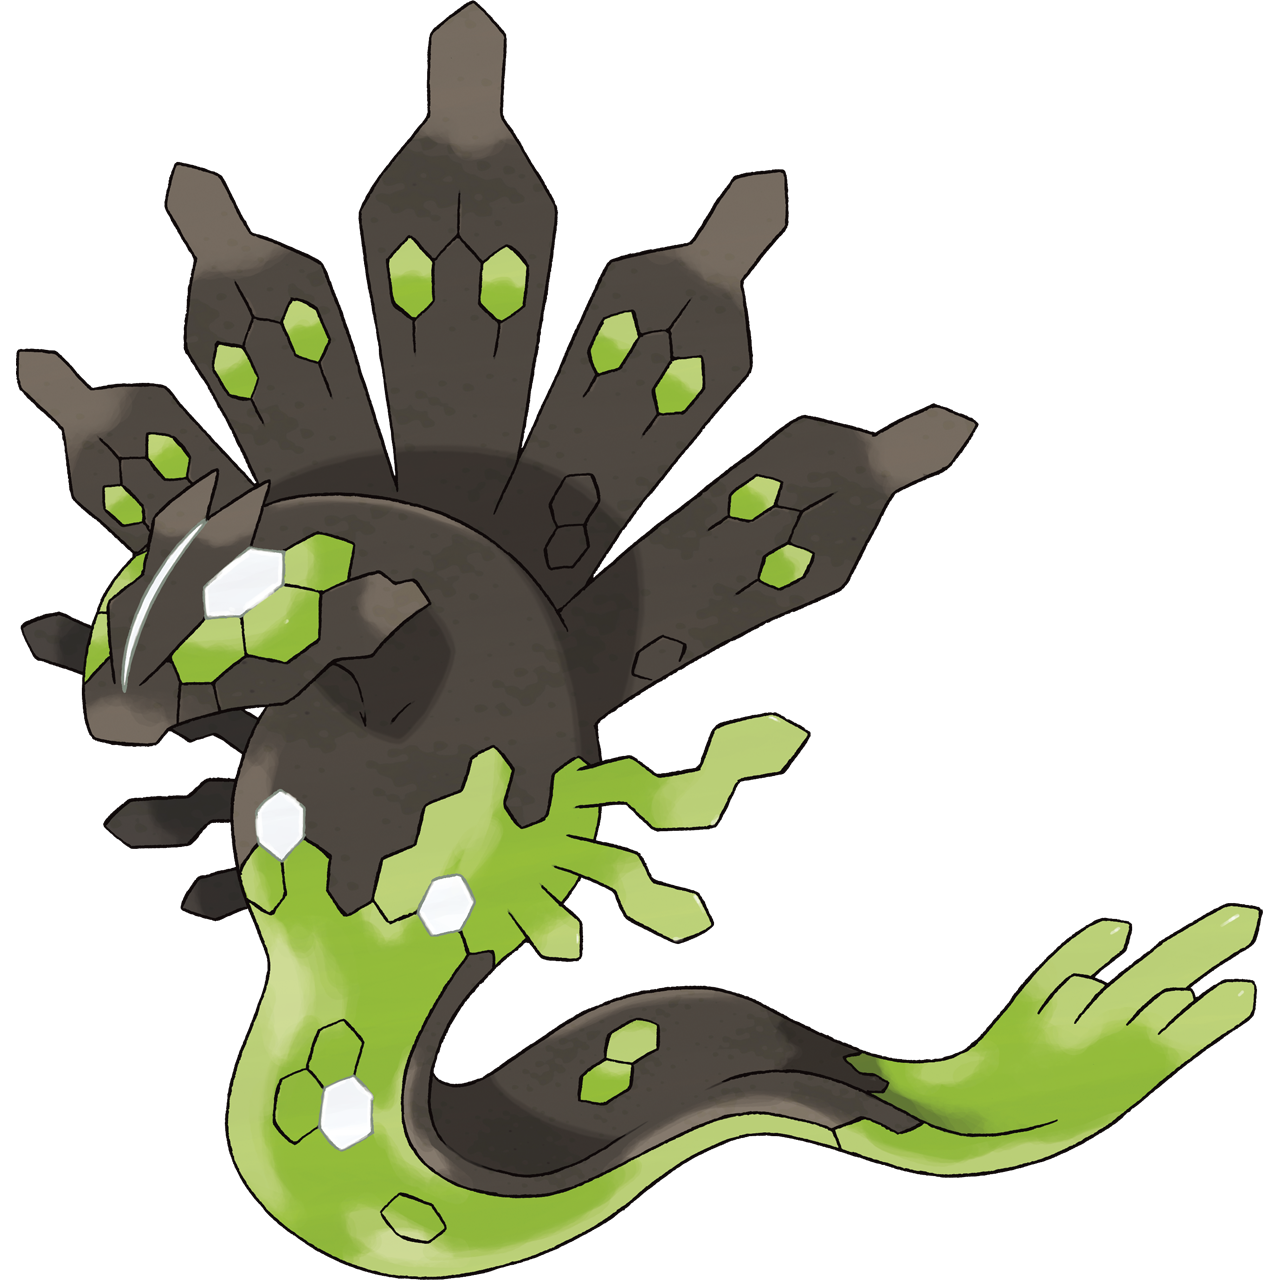 Official Zygarde 50% Form art